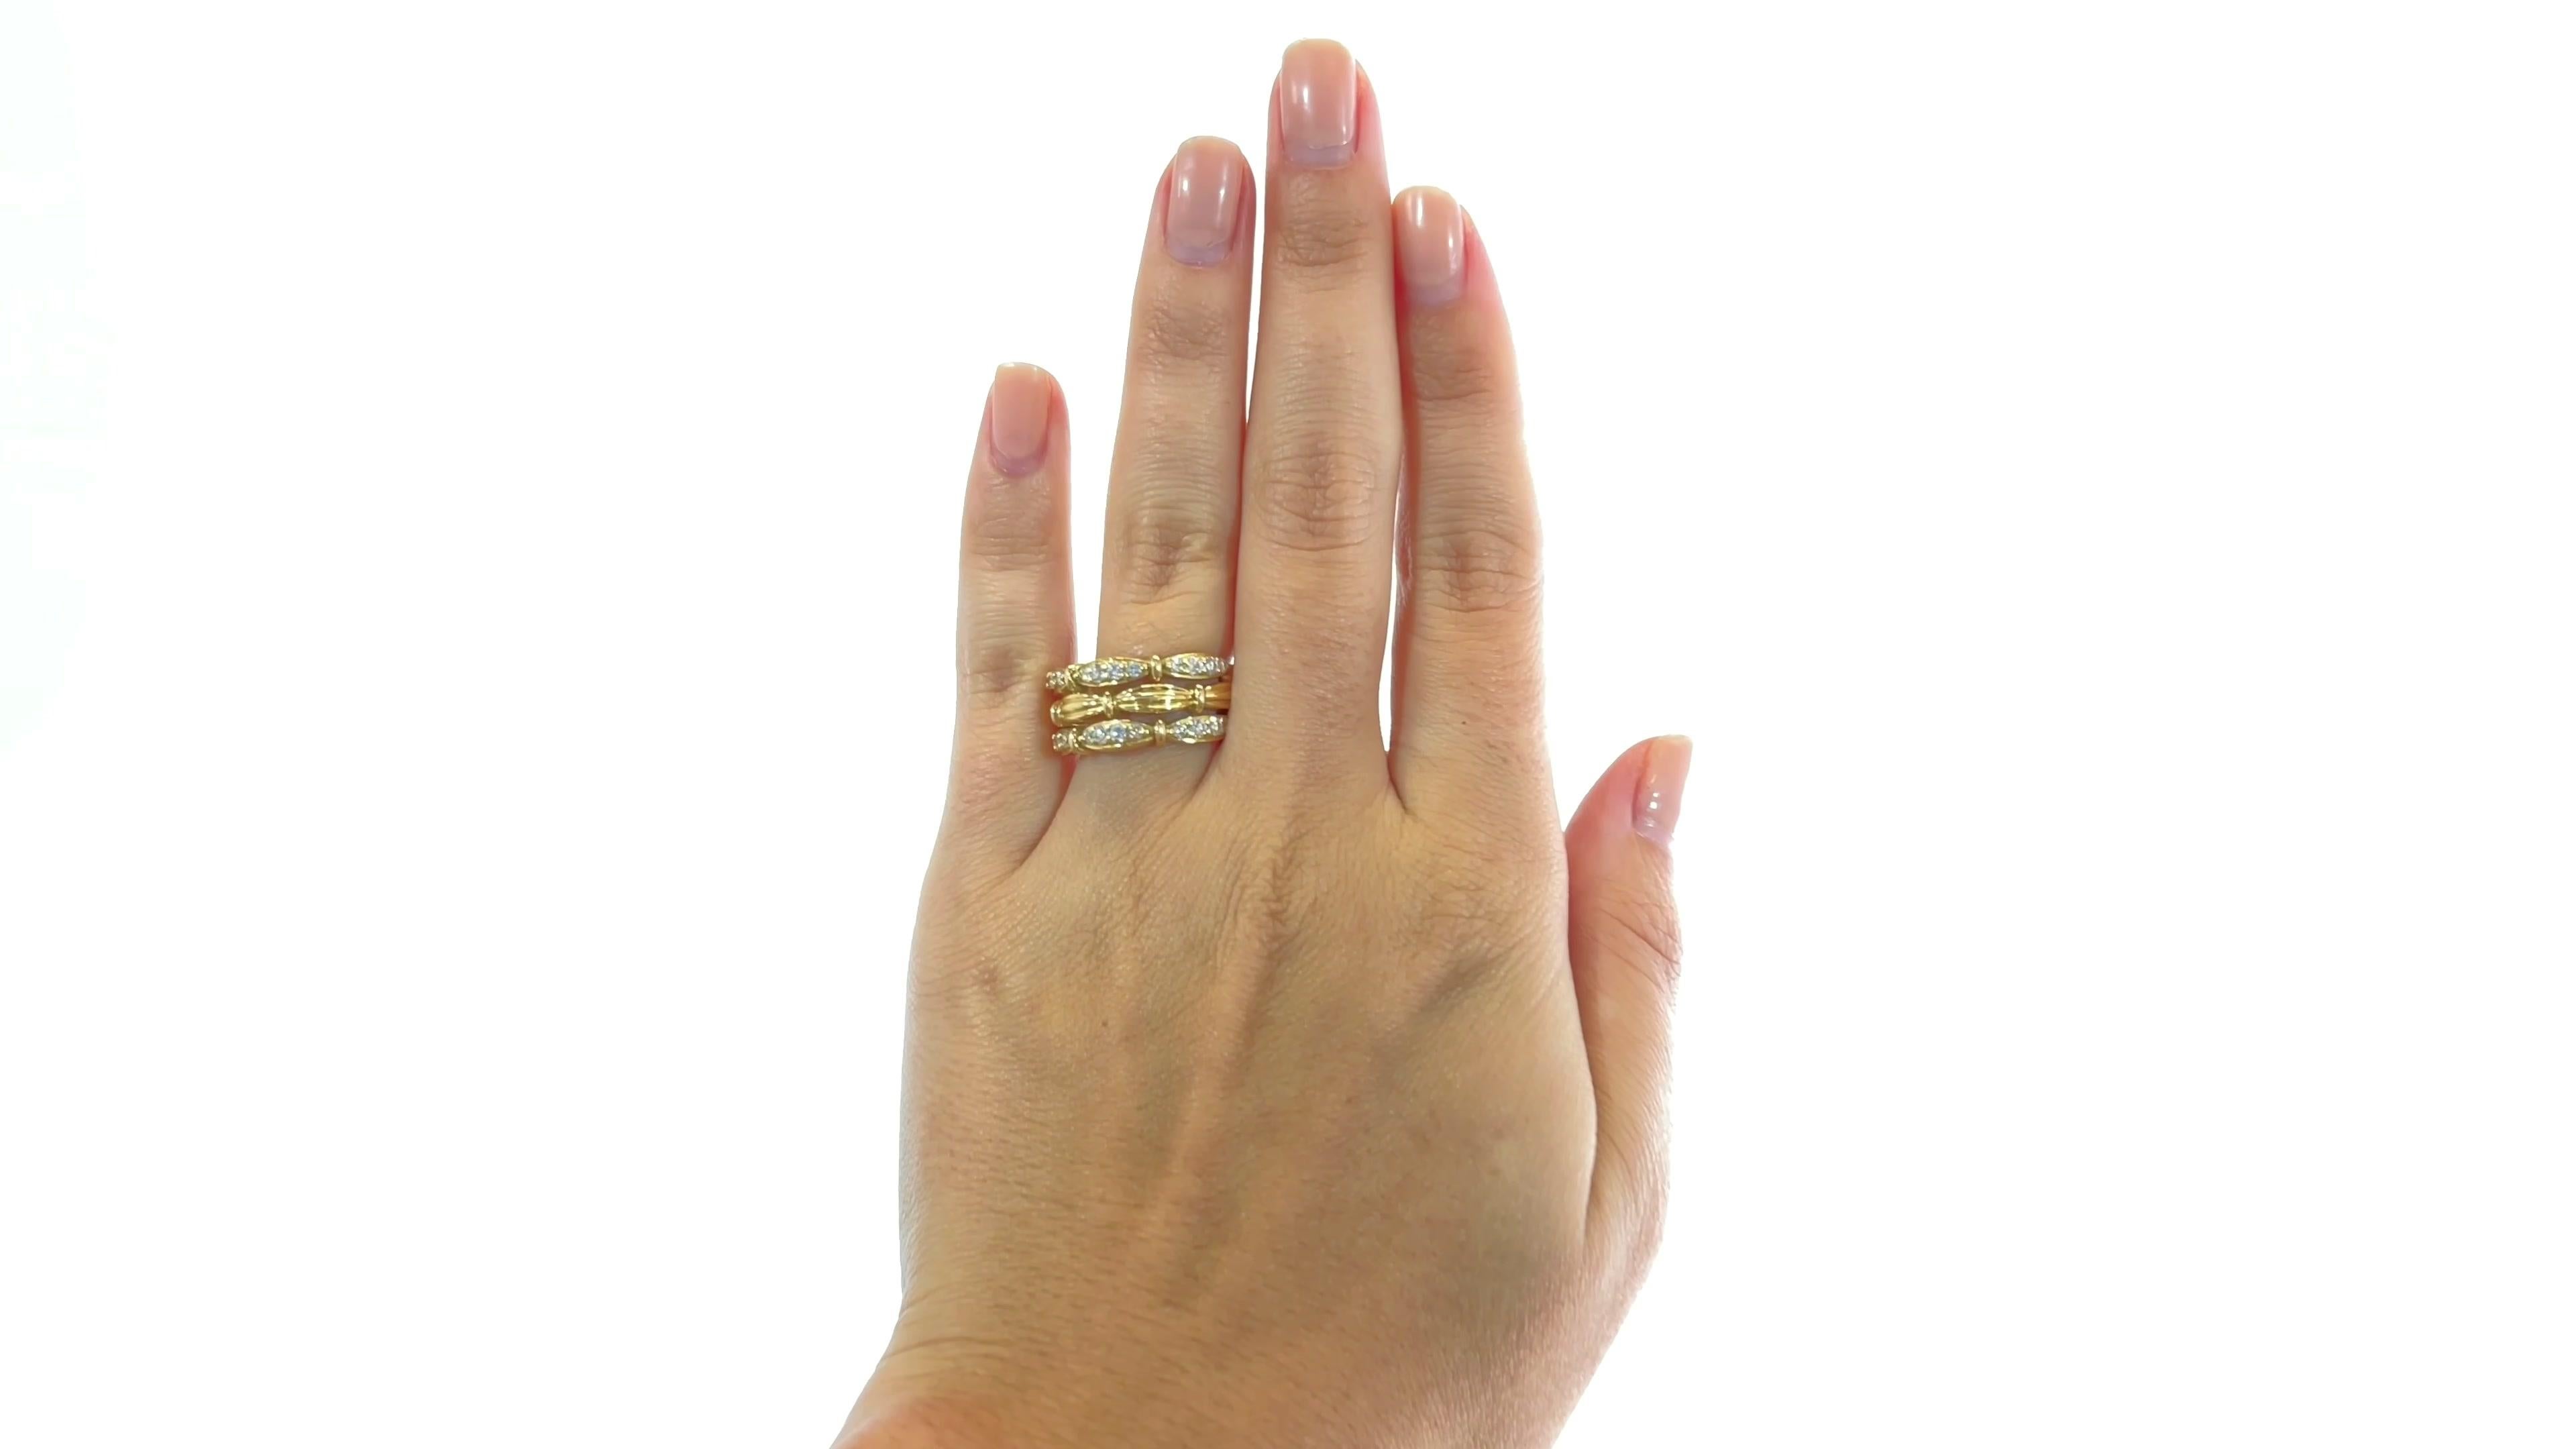 Vintage Tiffany & Co. Diamond 18 Karat Gold Ring. Featuring 24 Round Brilliant Cut diamonds approximately 0.72 carat total, D-E color, VVS clarity. Signed Tiffany & Co. 1992 with purity mark. Circa 1990s. Size 7 1/2 and may be resized.

About The